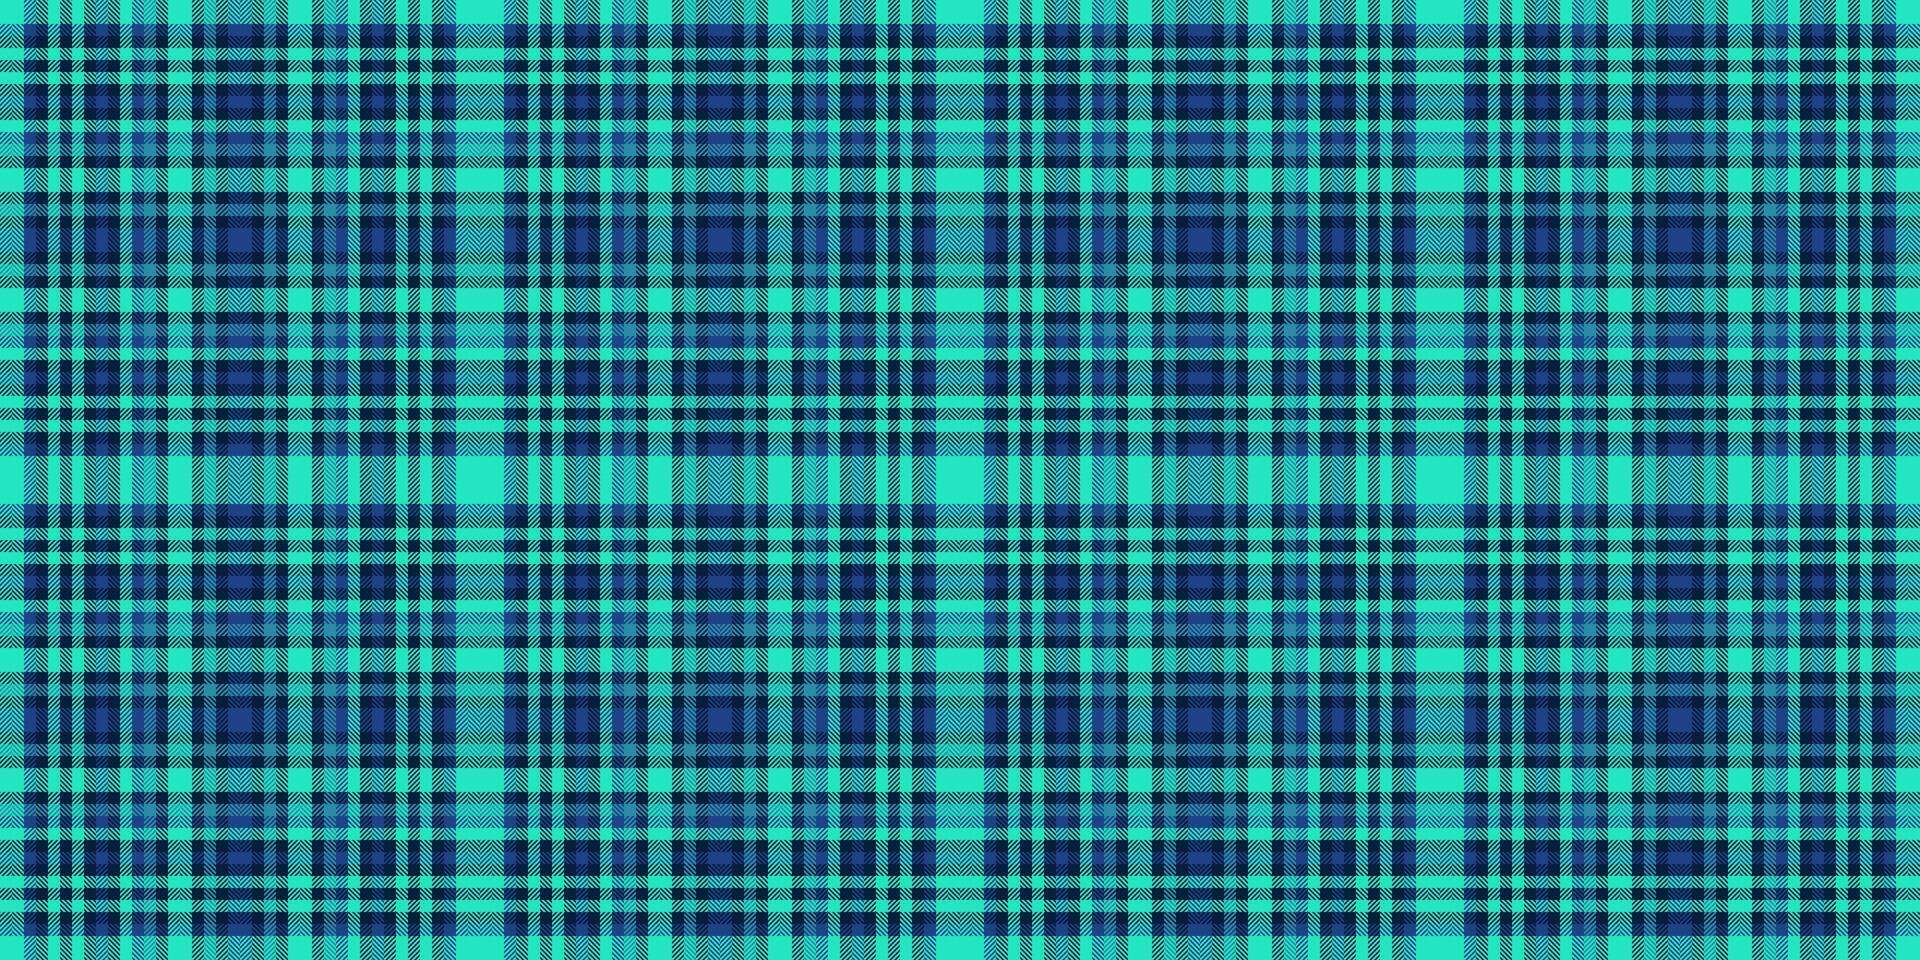 Straight check textile plaid, mixed background tartan fabric. Periodic pattern seamless vector texture in dark and teal colors.